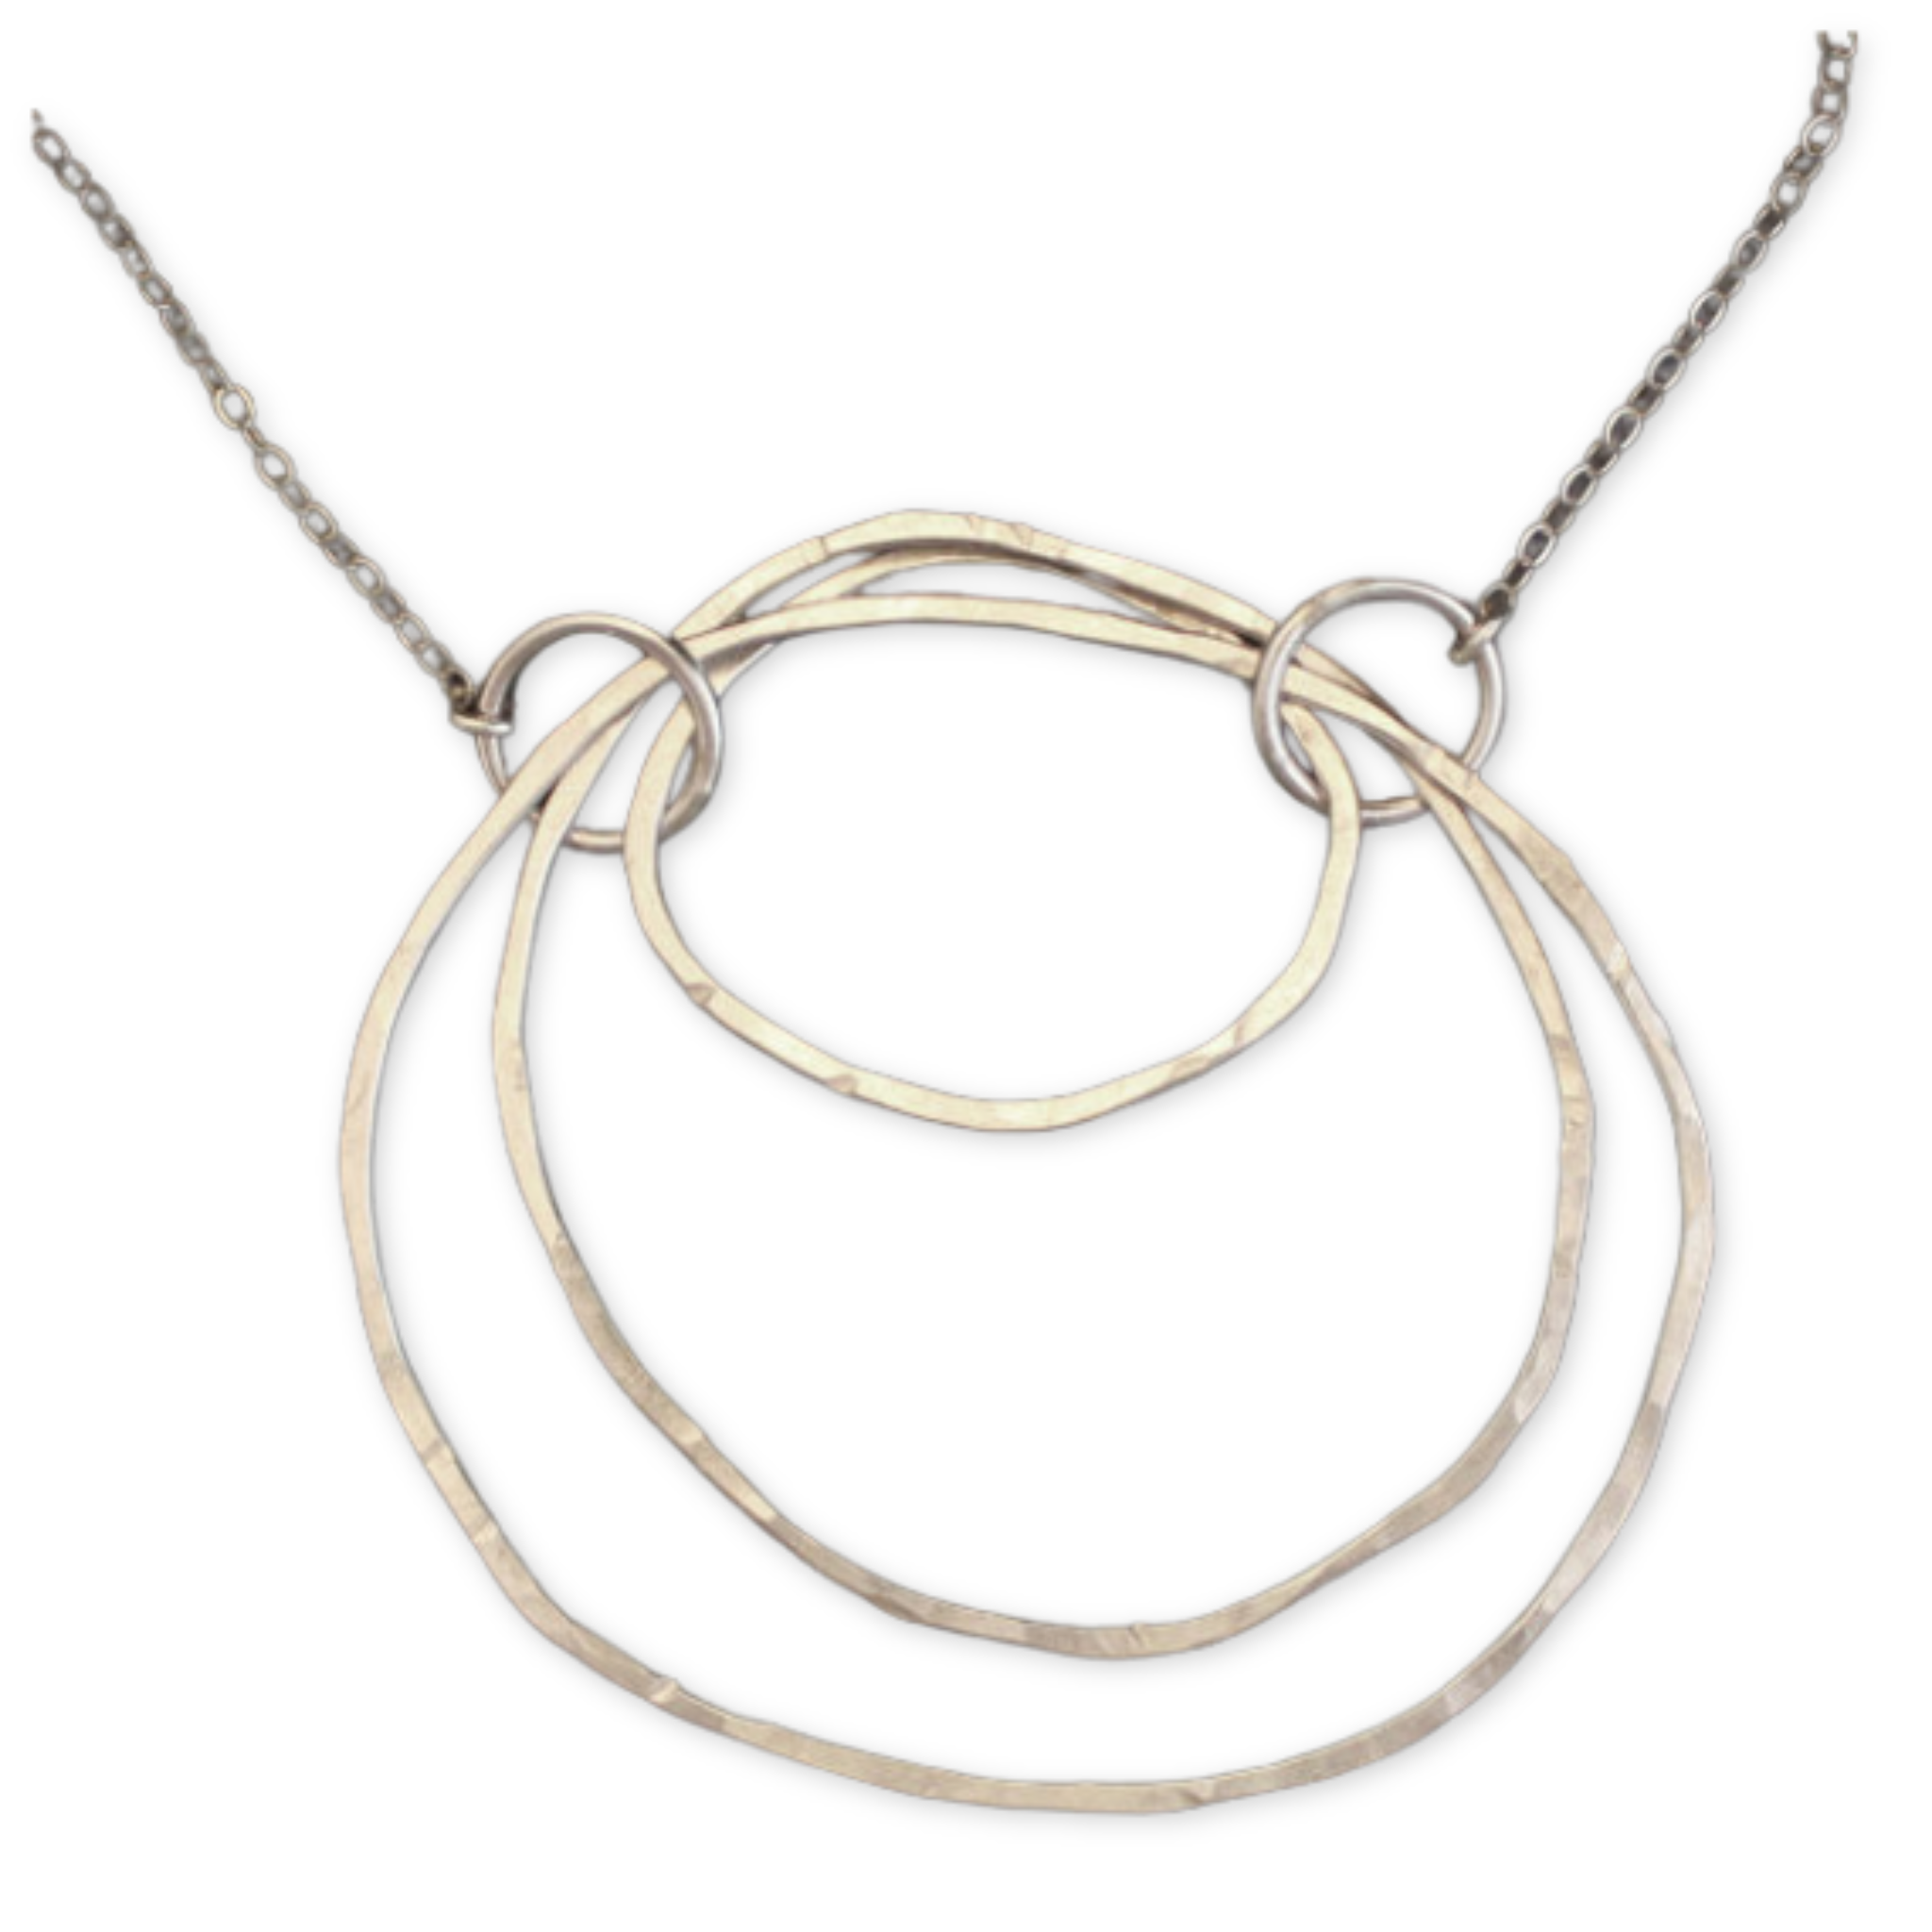 nesting necklace with three different sized organic hoops